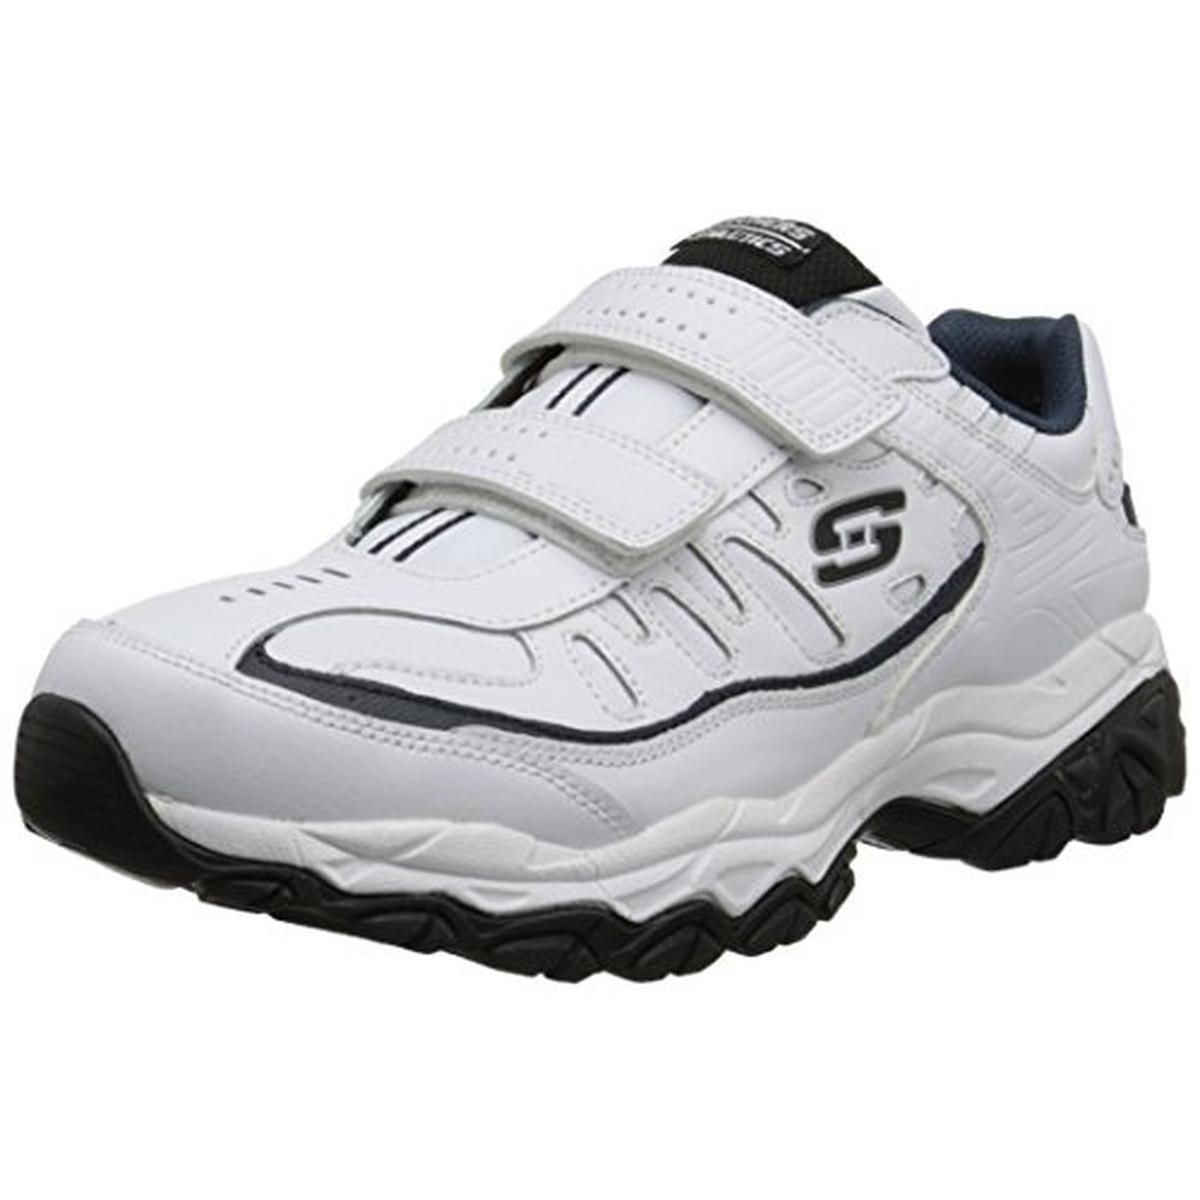 Skechers Mens After Burn White Casual Sneakers 14 Extra Wide (4E) BHFO ...